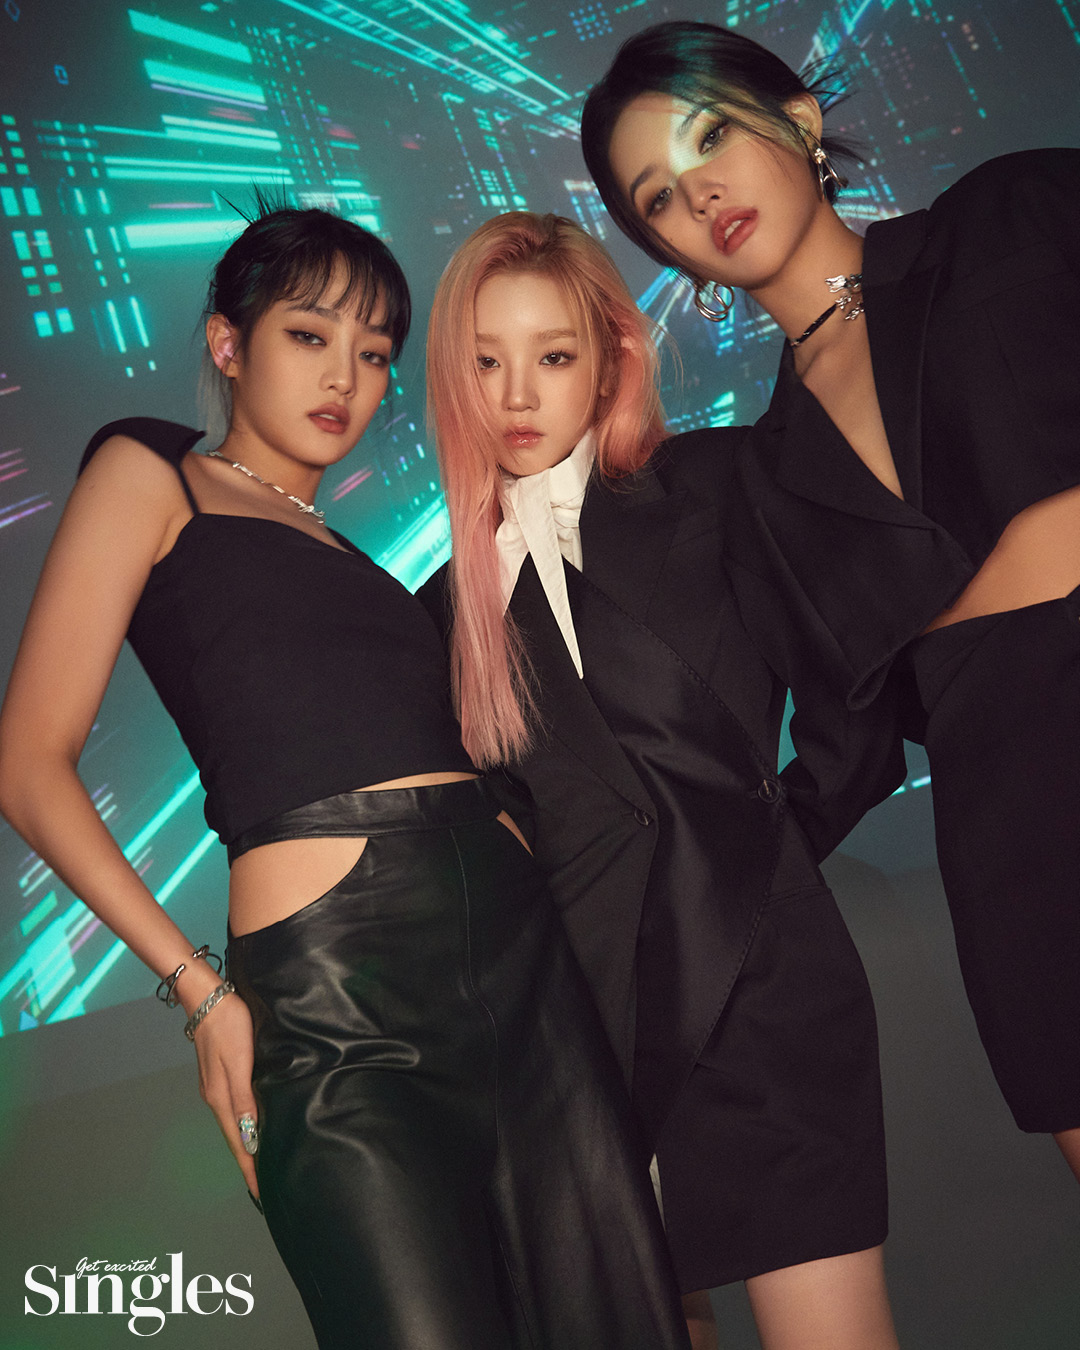 (G)I-DLE Gets Featured in Singles Magazine